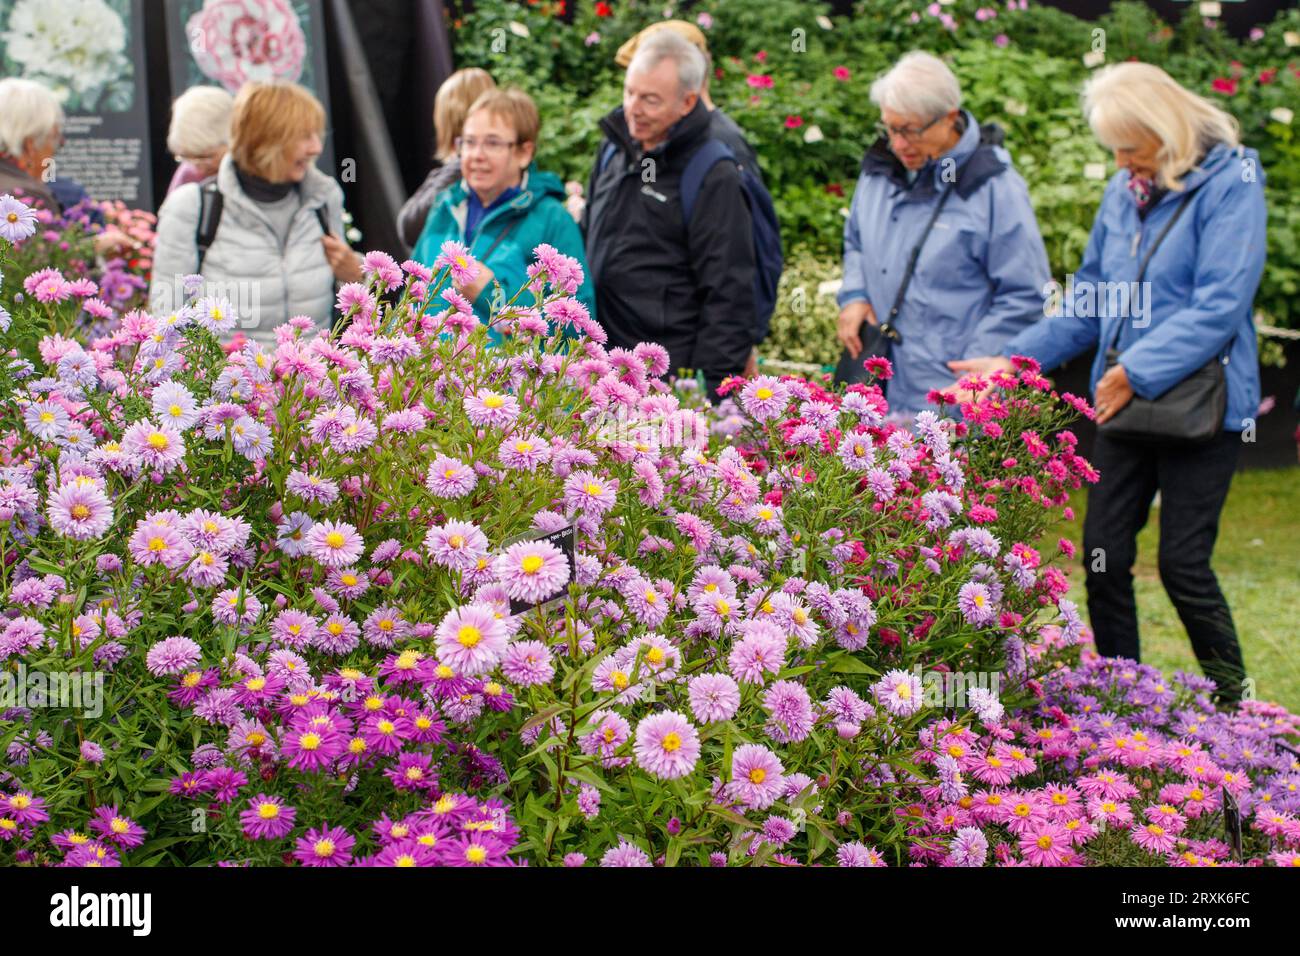 People admiring the flower displays in the Garden Theatre at the Malvern Autumnal Show. The Three day Malvern Autumn Show at the Three Counties Showground, Malvern, Worcestershire, England, UK. Stock Photo